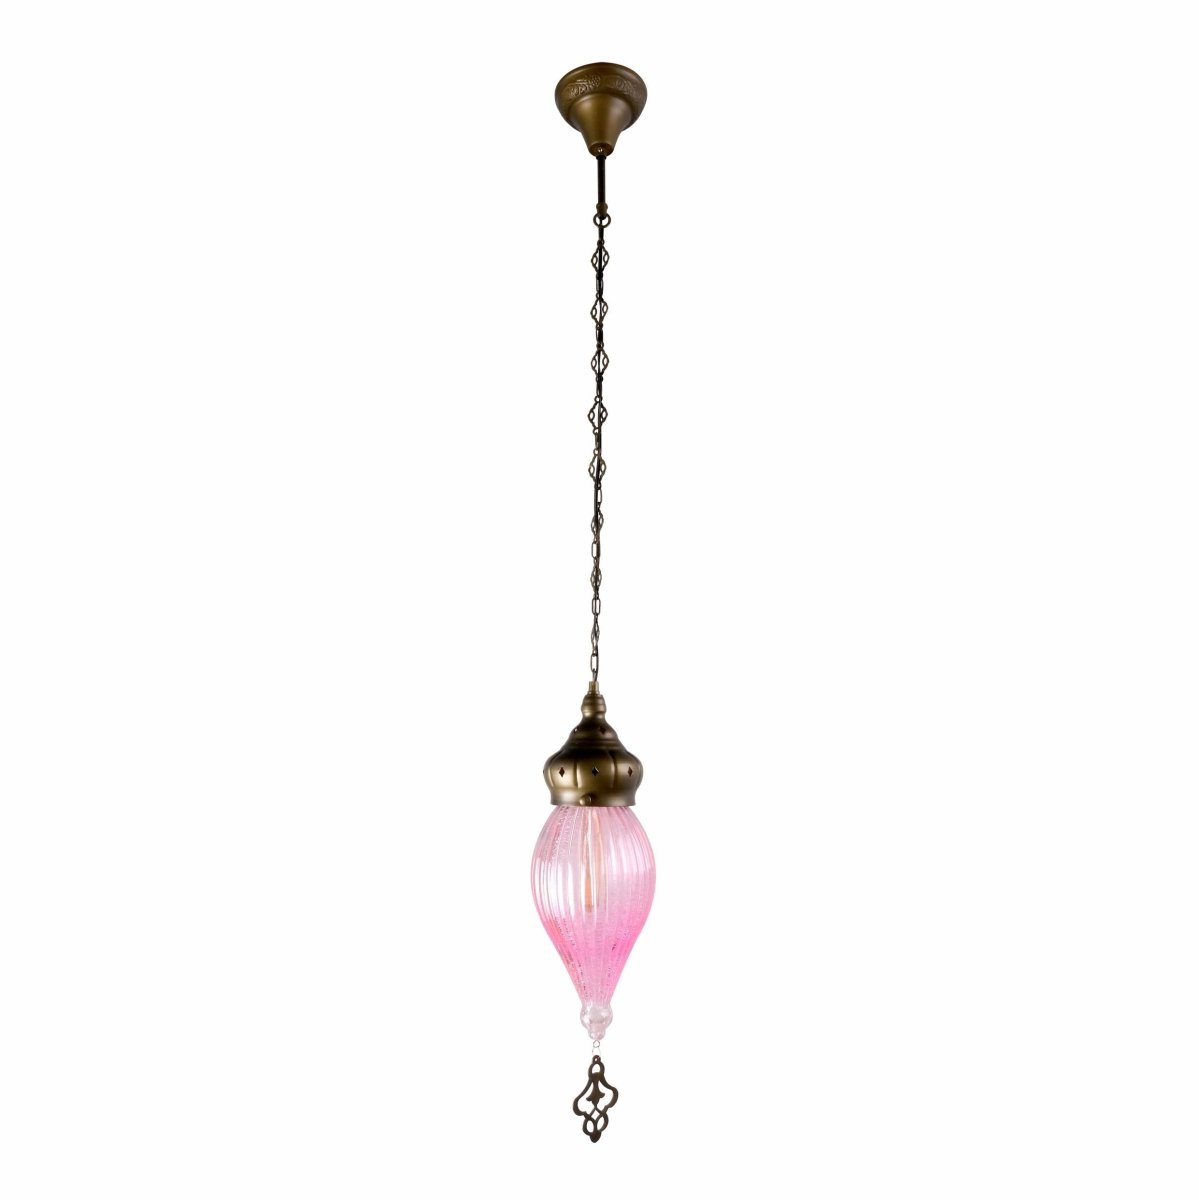 Main image of Moroccan Style Antique Brass and Pink Glass Pendant Light E27 | TEKLED 158-195584